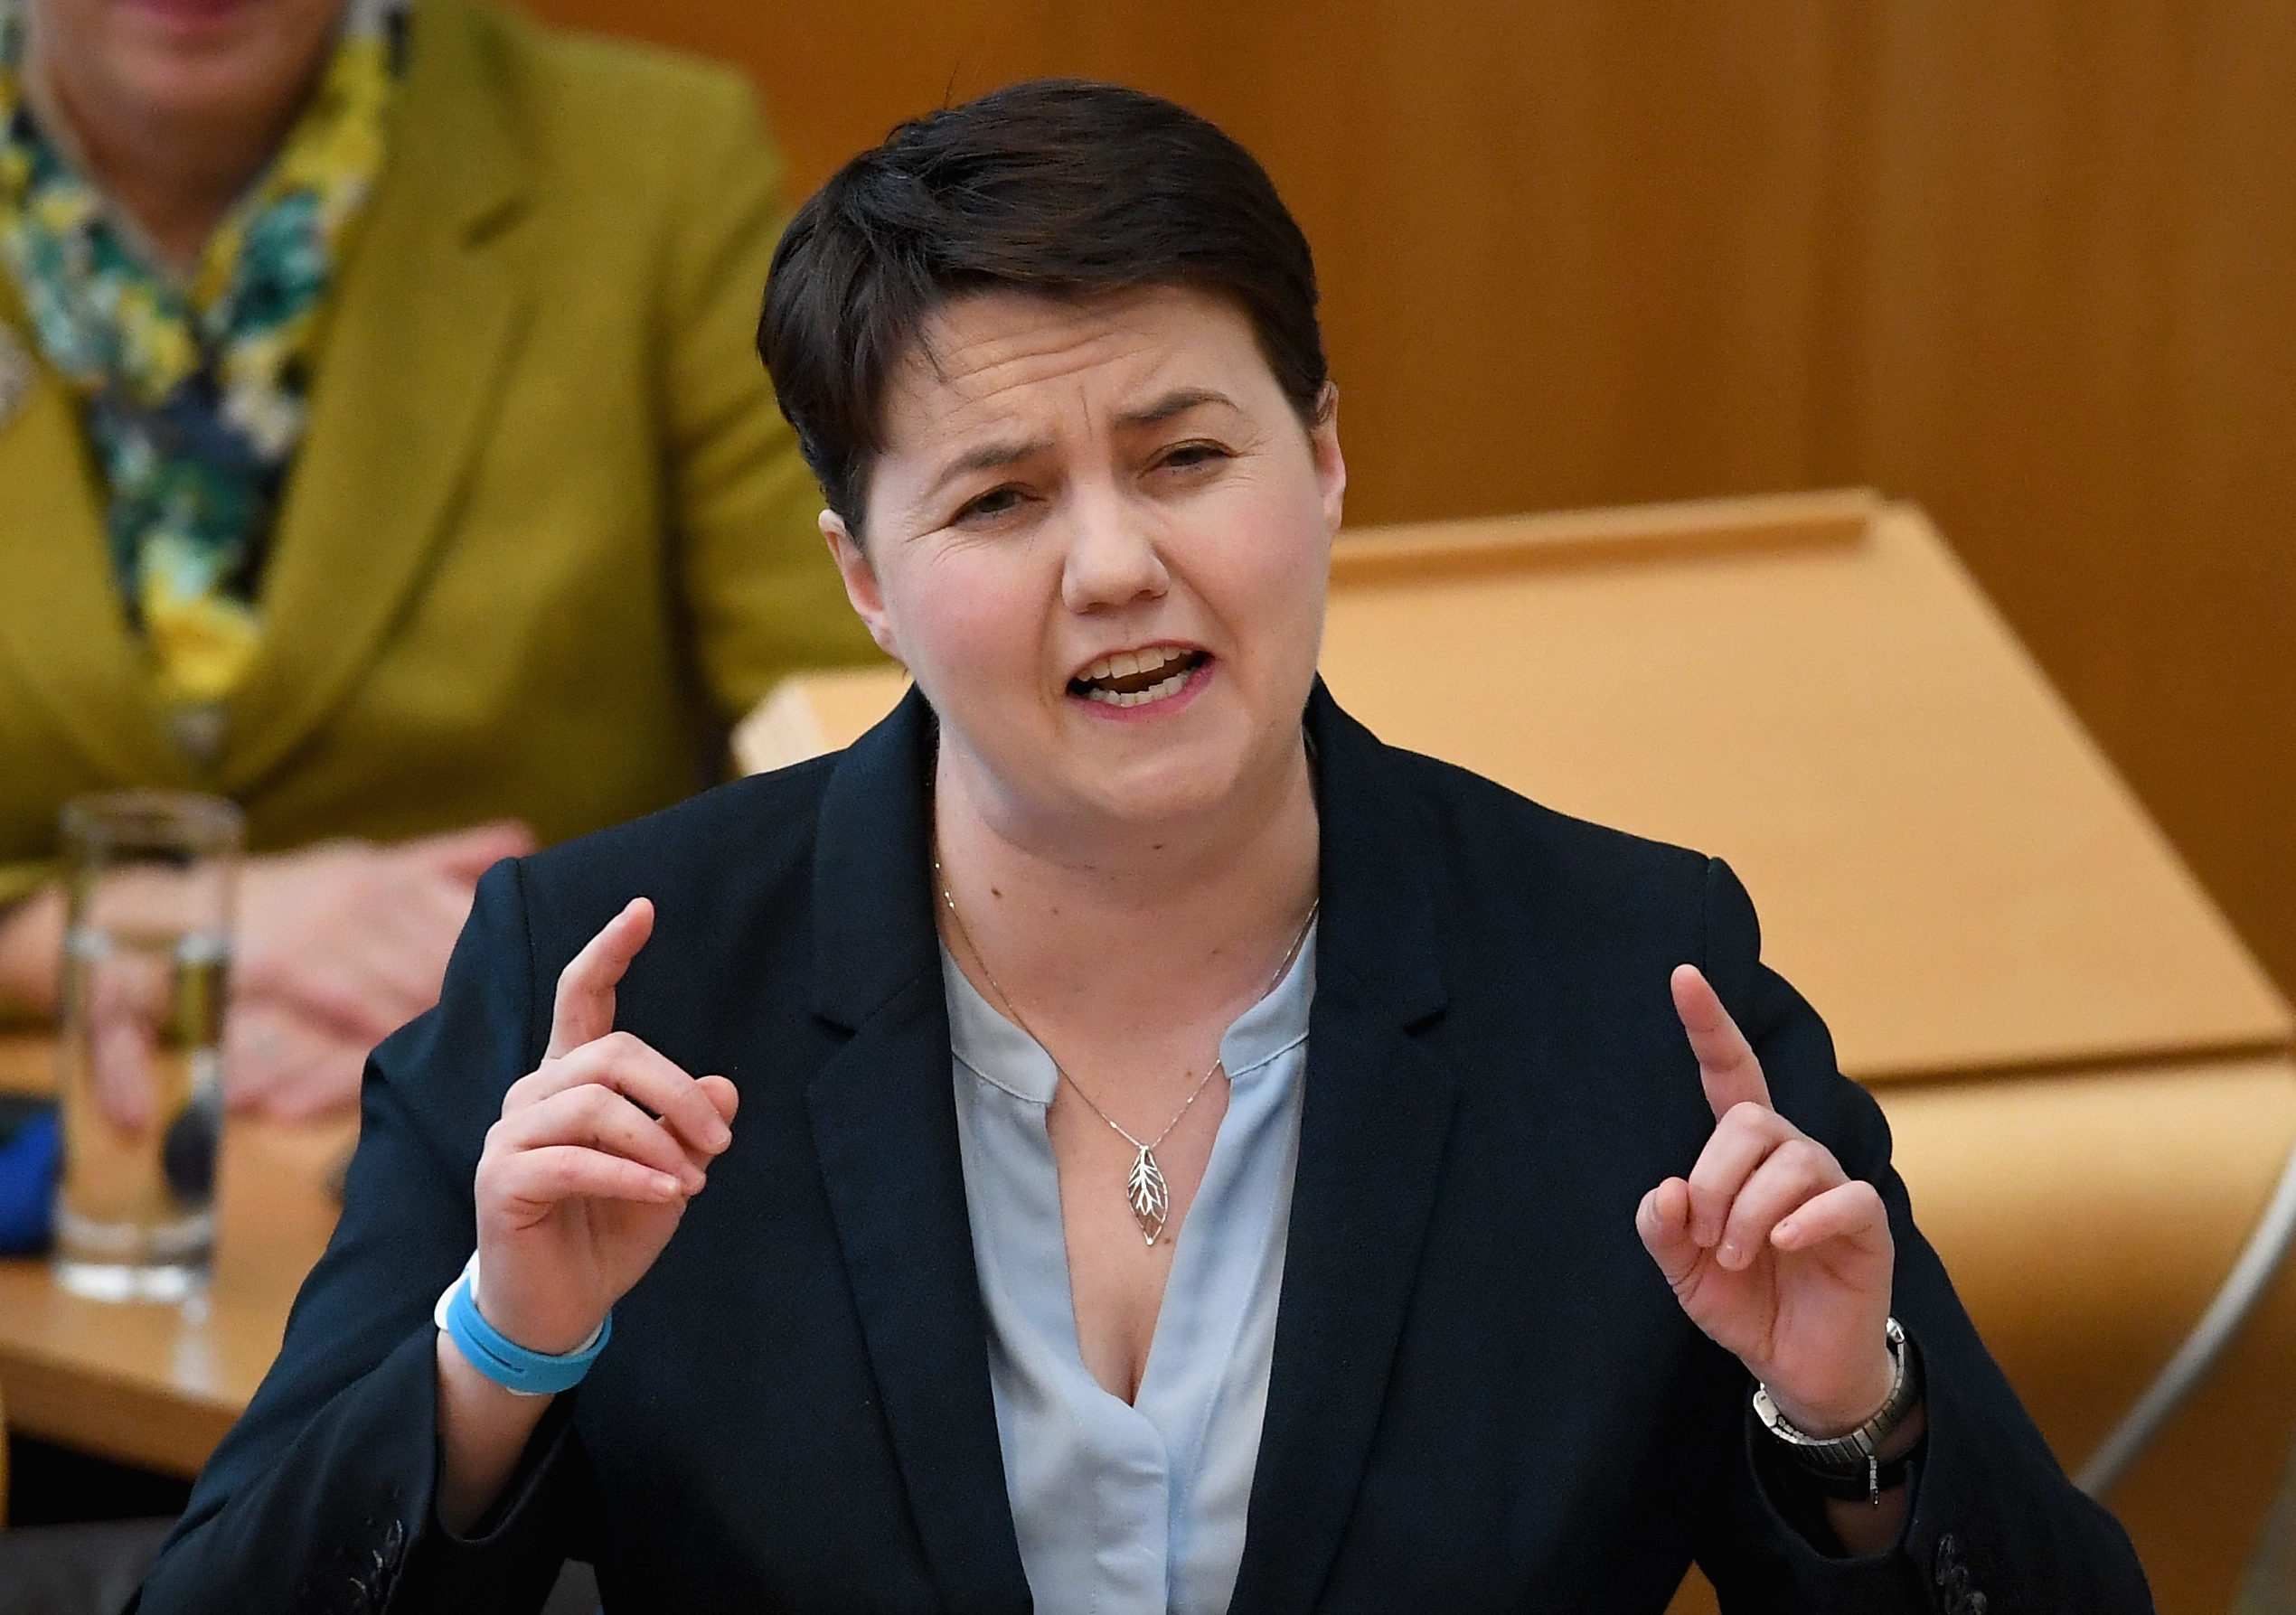 Scottish Conservative party leader Ruth Davidson will be taking part in The Great Celebrity Bake Off (Photo by Jeff J Mitchell/Getty Images)